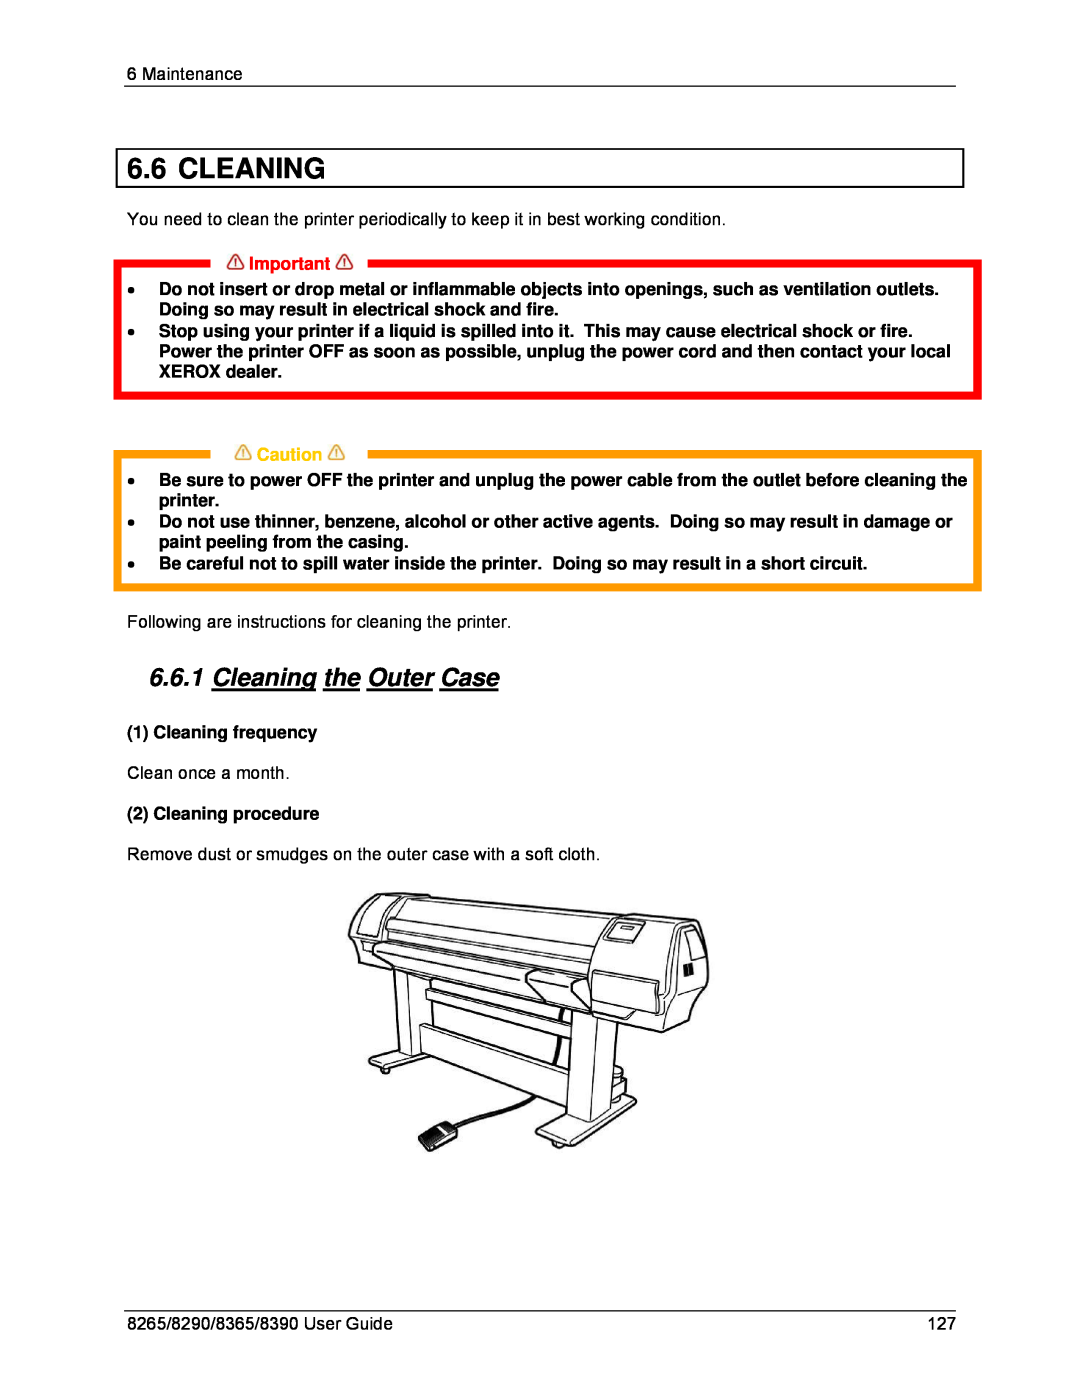 Xerox 8365, 8290, 8265, 8390 manual Cleaning the Outer Case, Cleaning frequency, Cleaning procedure 